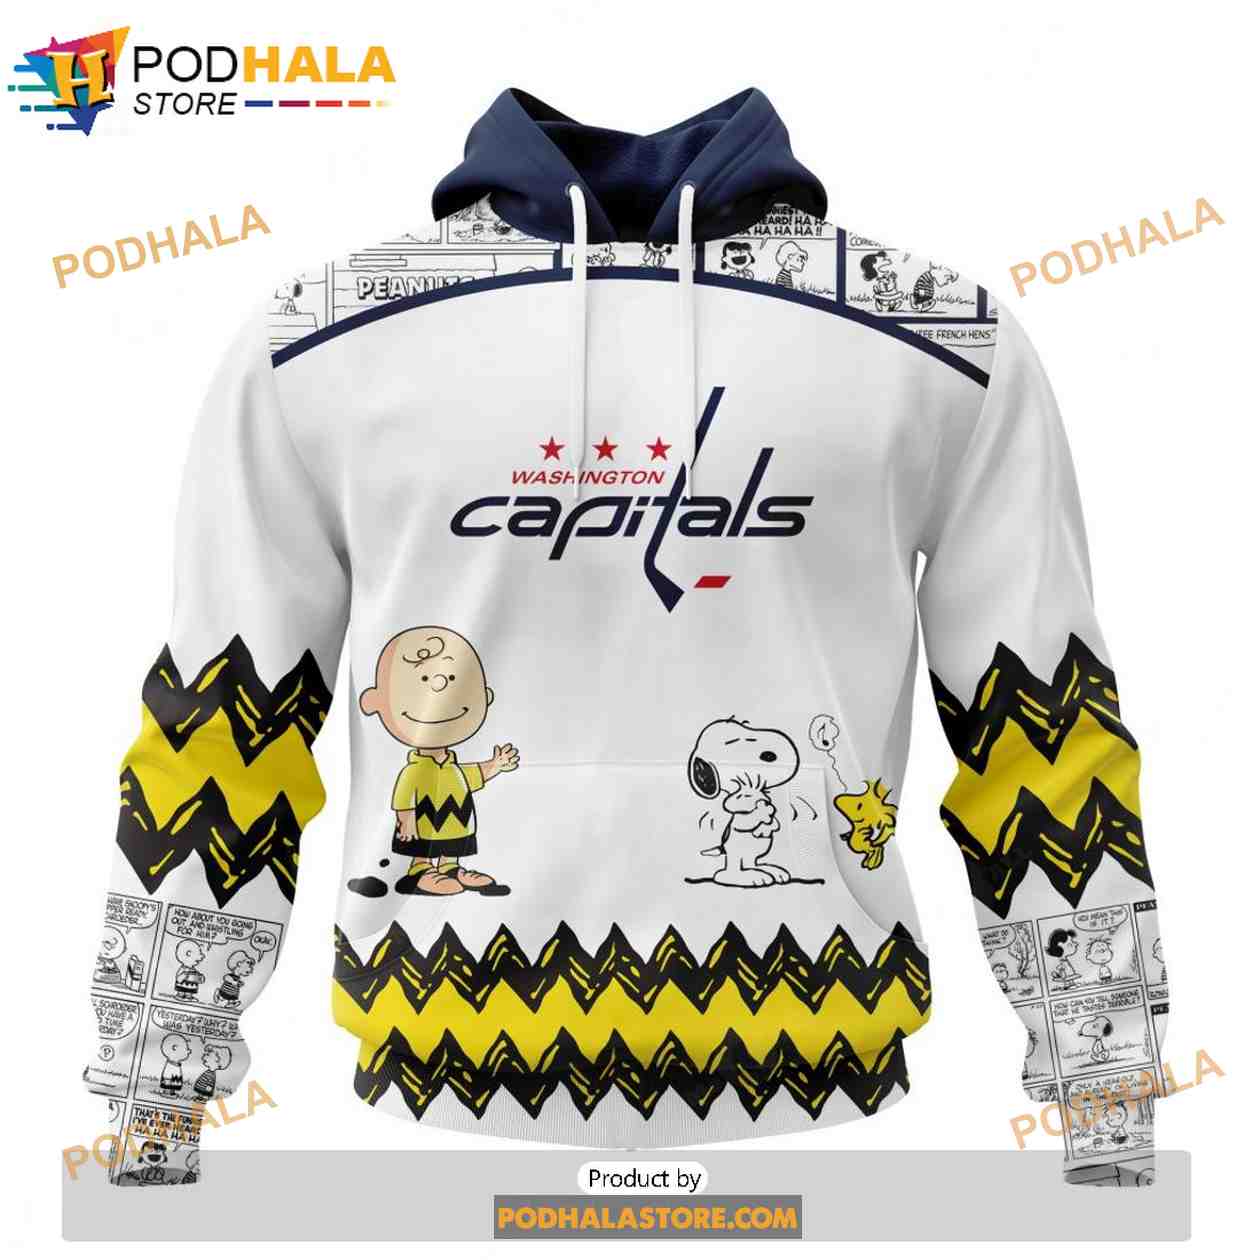 Capitals Reverse Retro Hoodie 3D Lets Go Caps Washington Capitals Gift -  Personalized Gifts: Family, Sports, Occasions, Trending